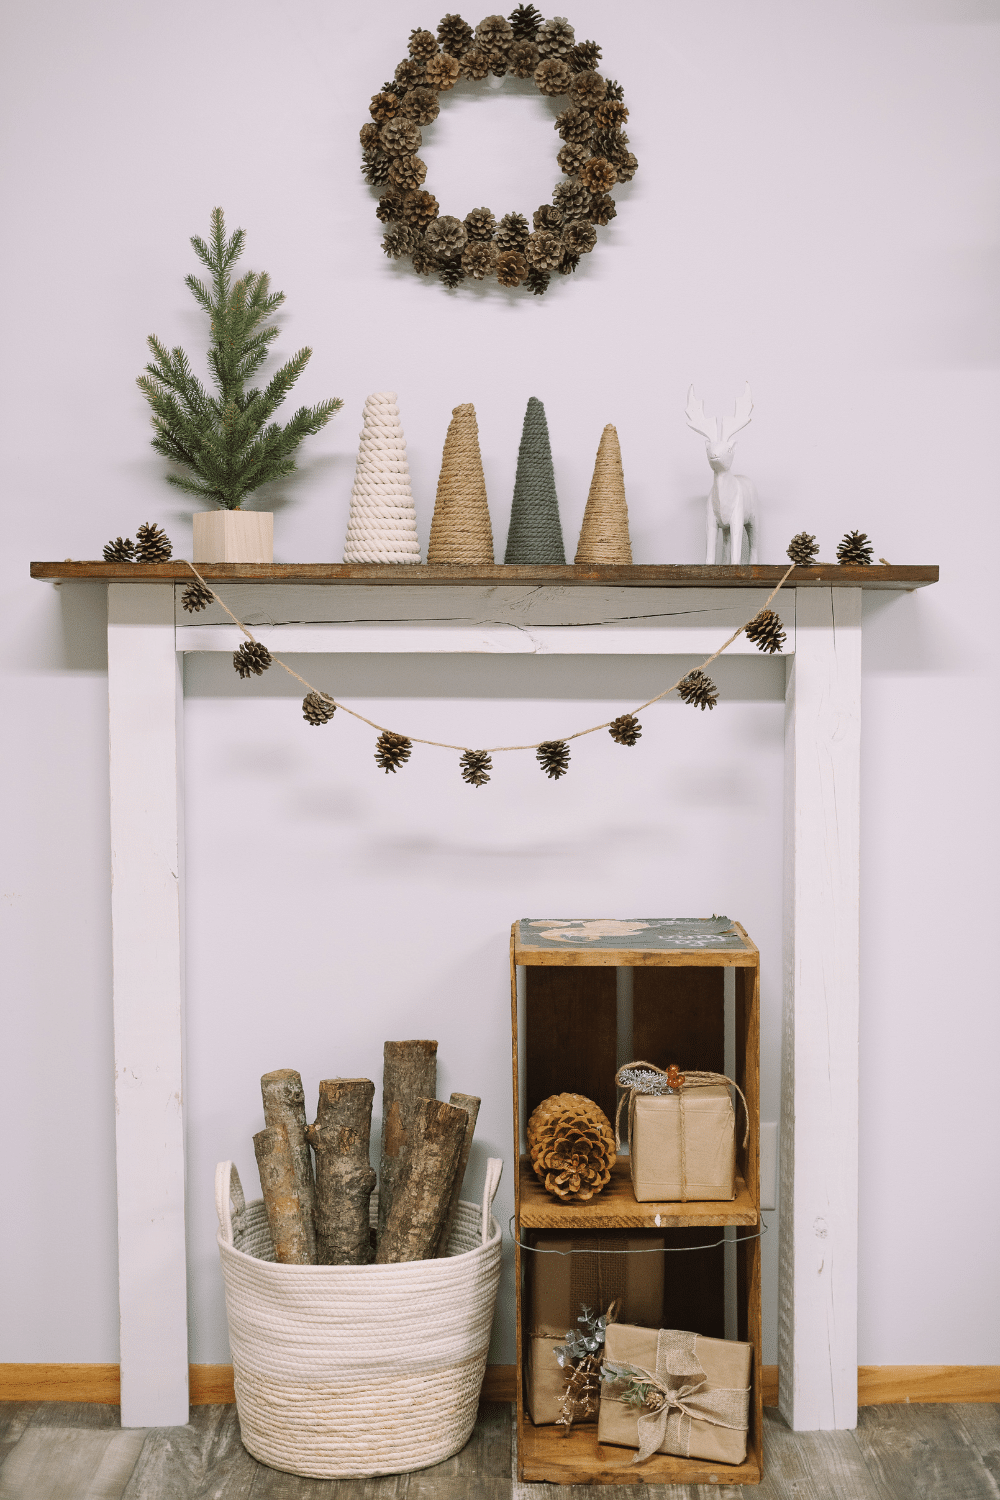 How to Make a Pinecone Garland